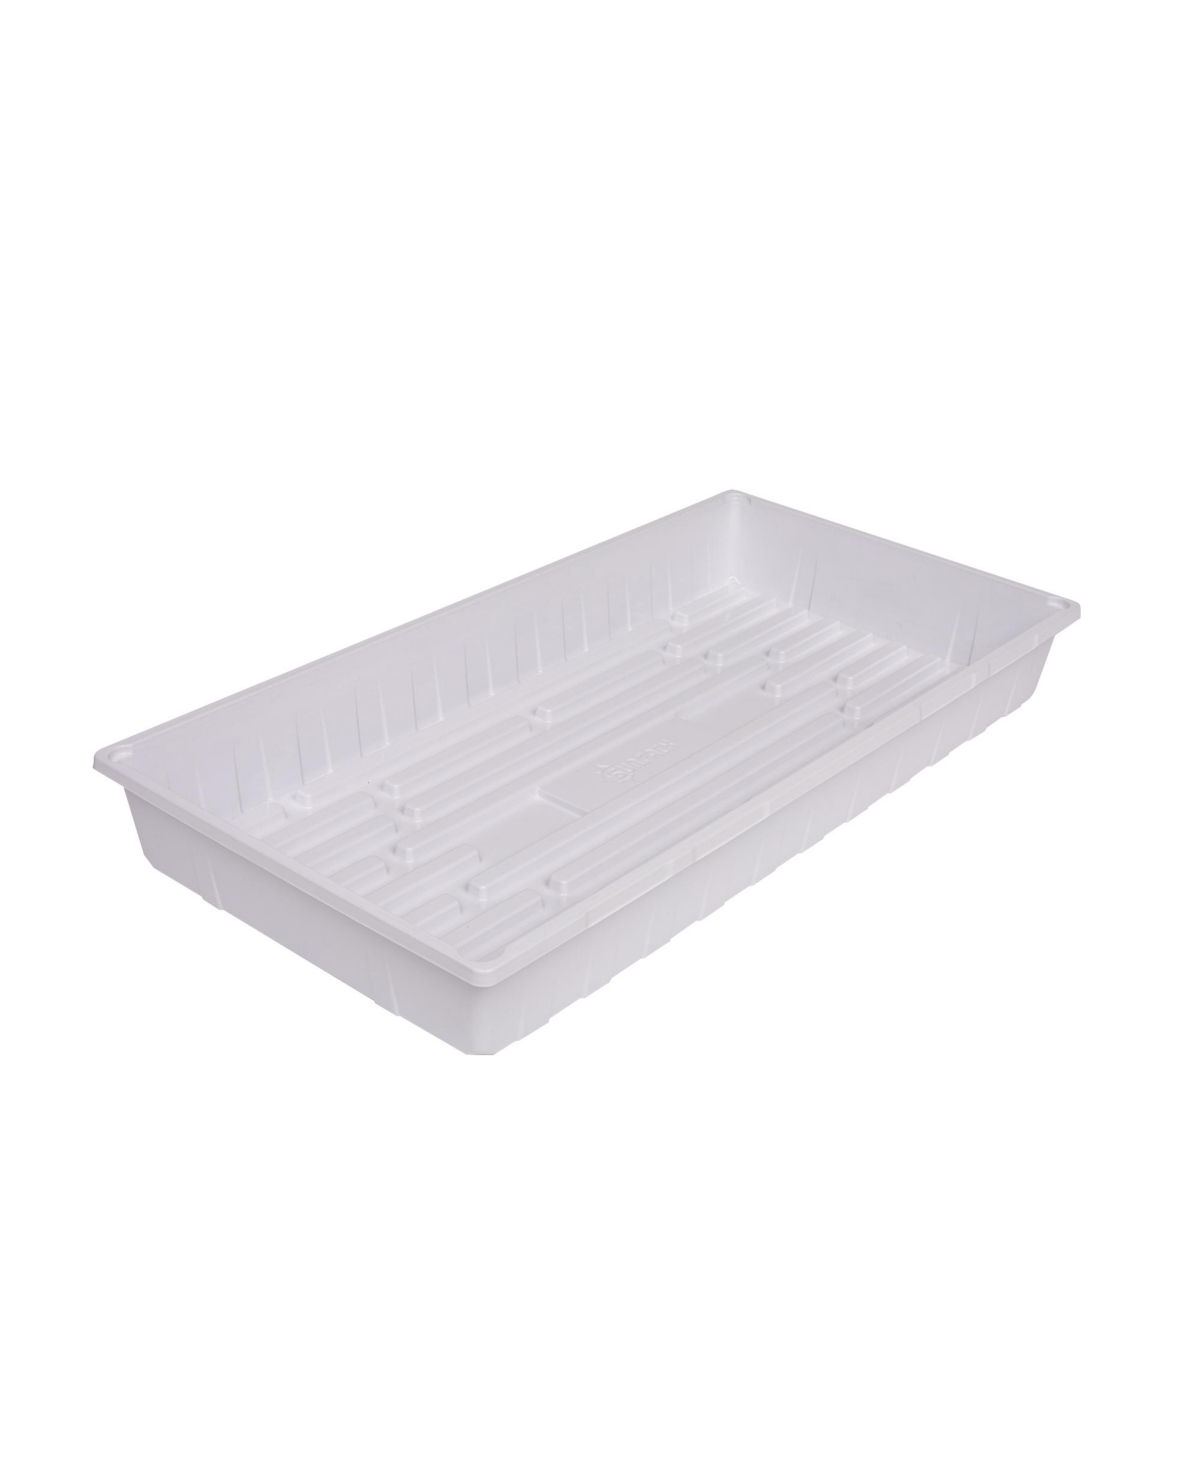 10 x 20in Indoor Gardening Extra Strength Seeding Tray, 2.5in - White